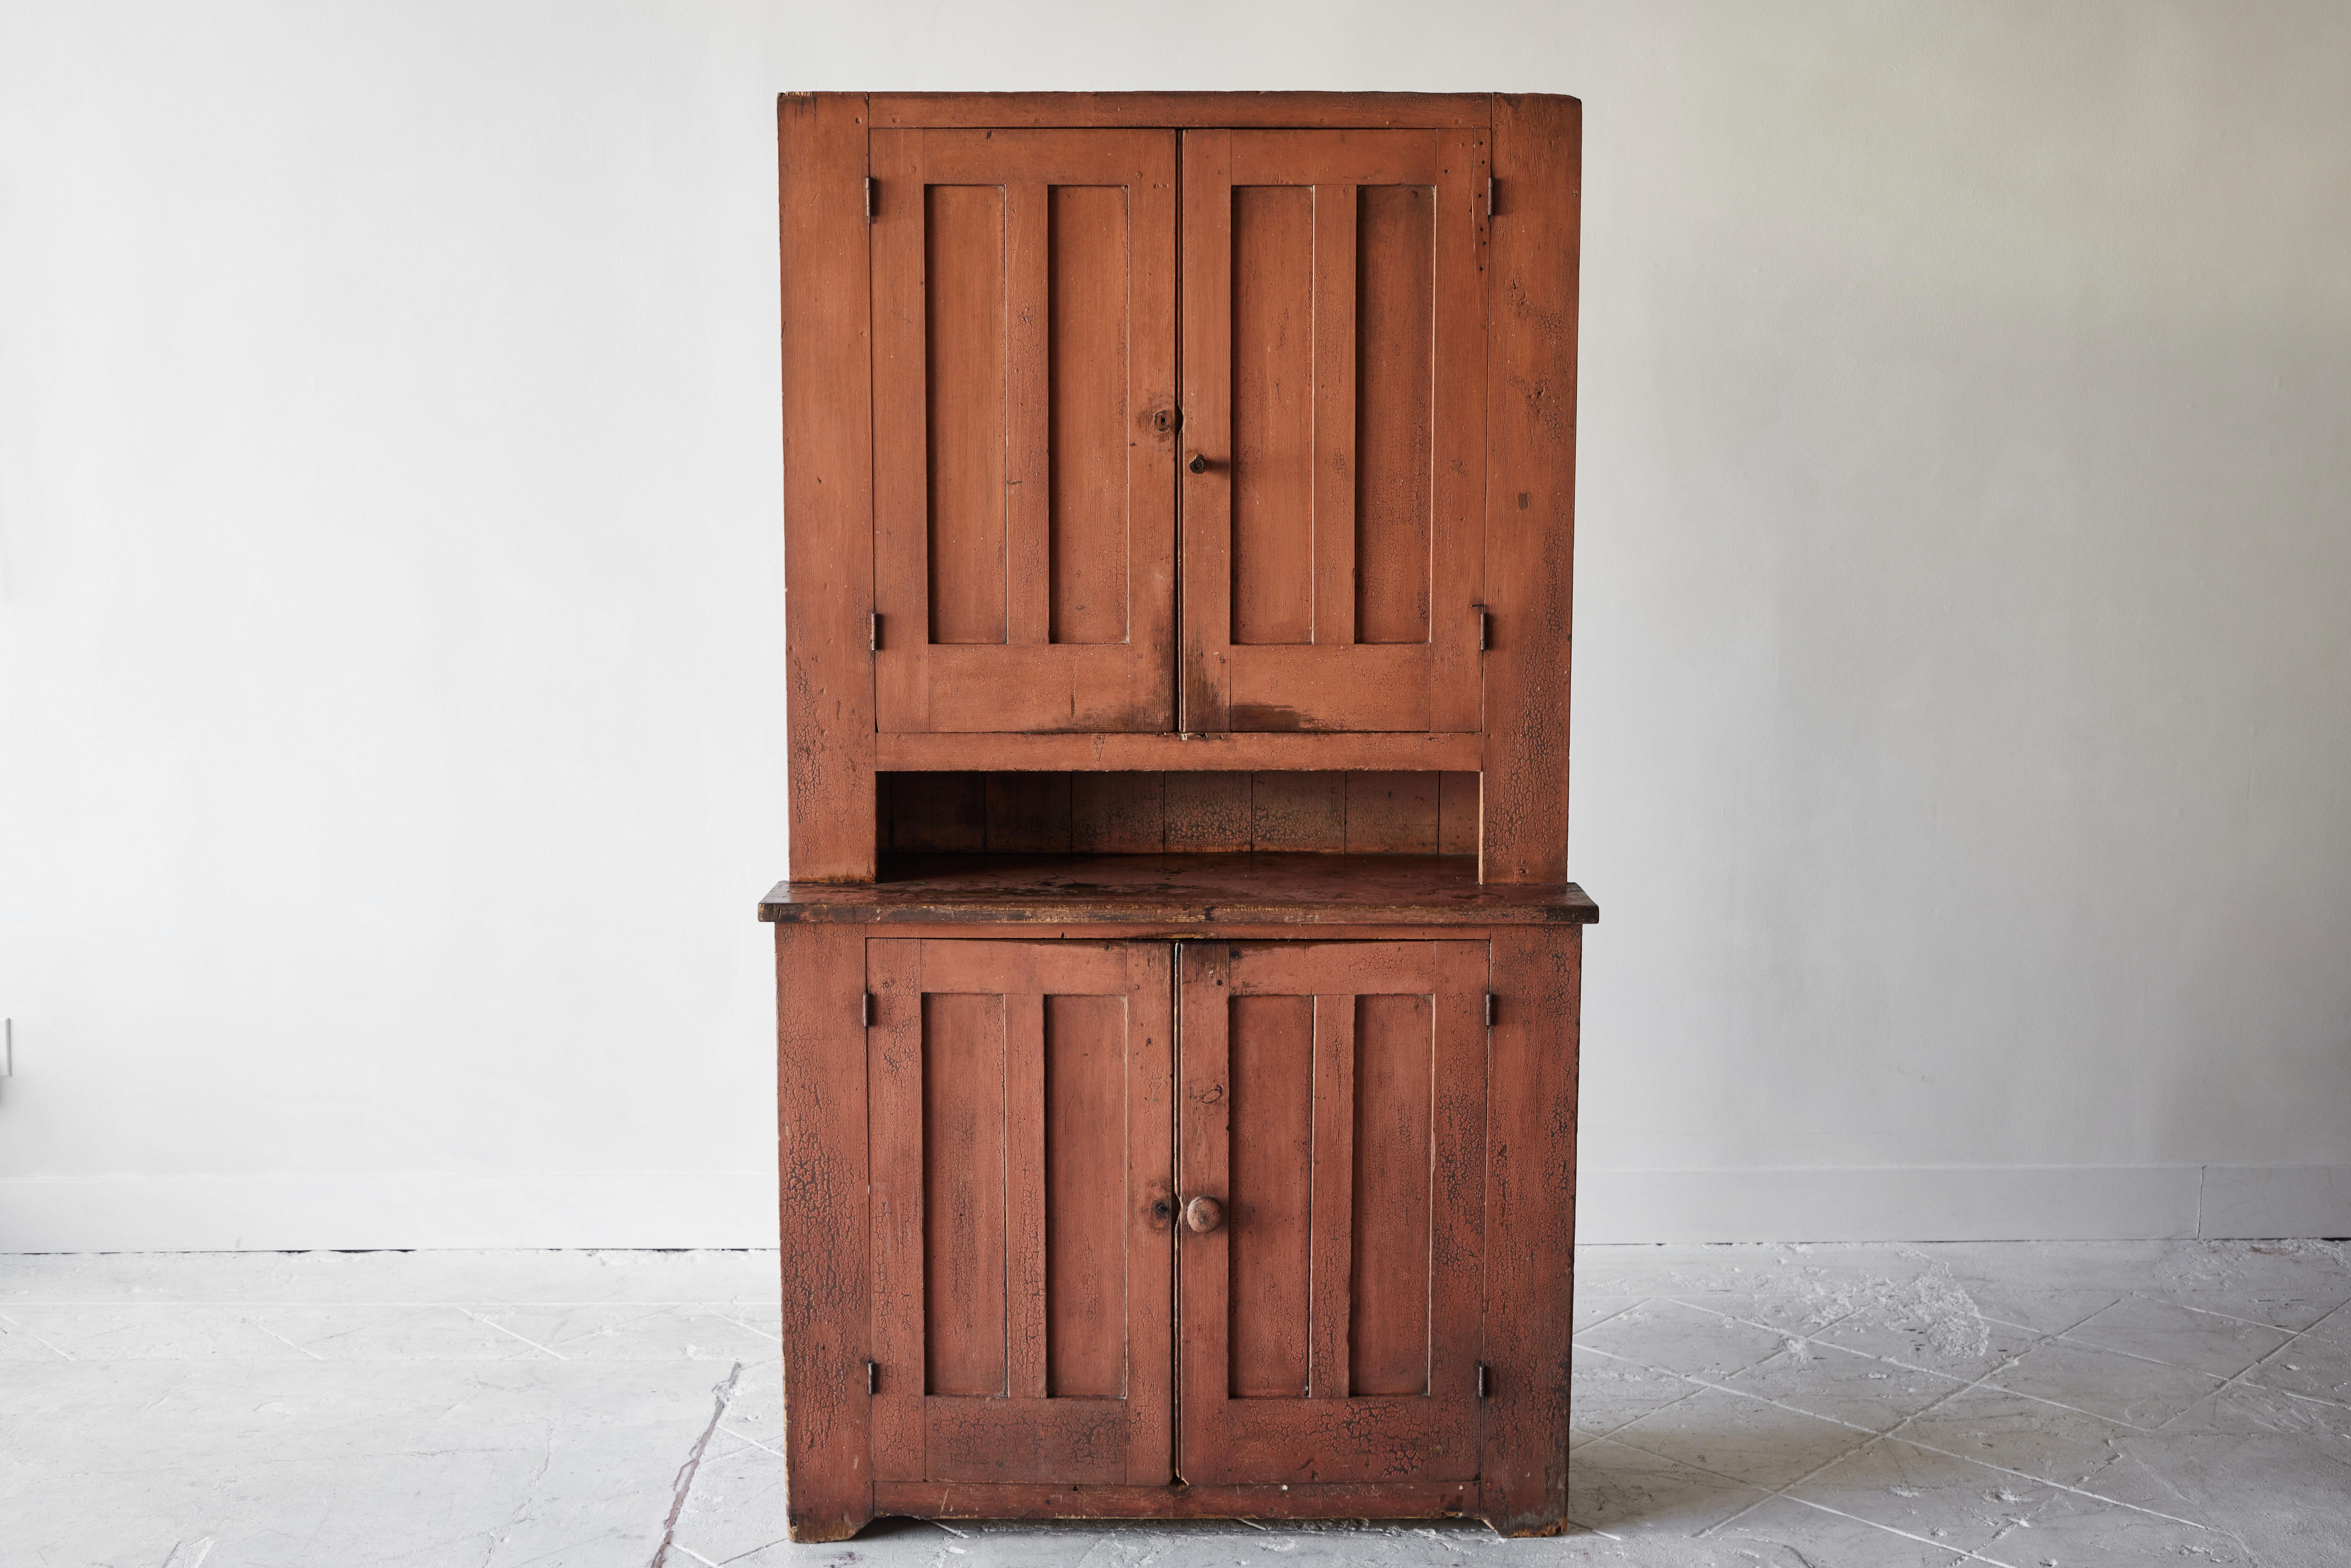 An attractive Early American four door cupboard with original paint. This cupboard is a wonderful utilitarian piece and features interior shelves allowing room for ample storage. The wood has a beautiful patina and the salmon color paint is correct